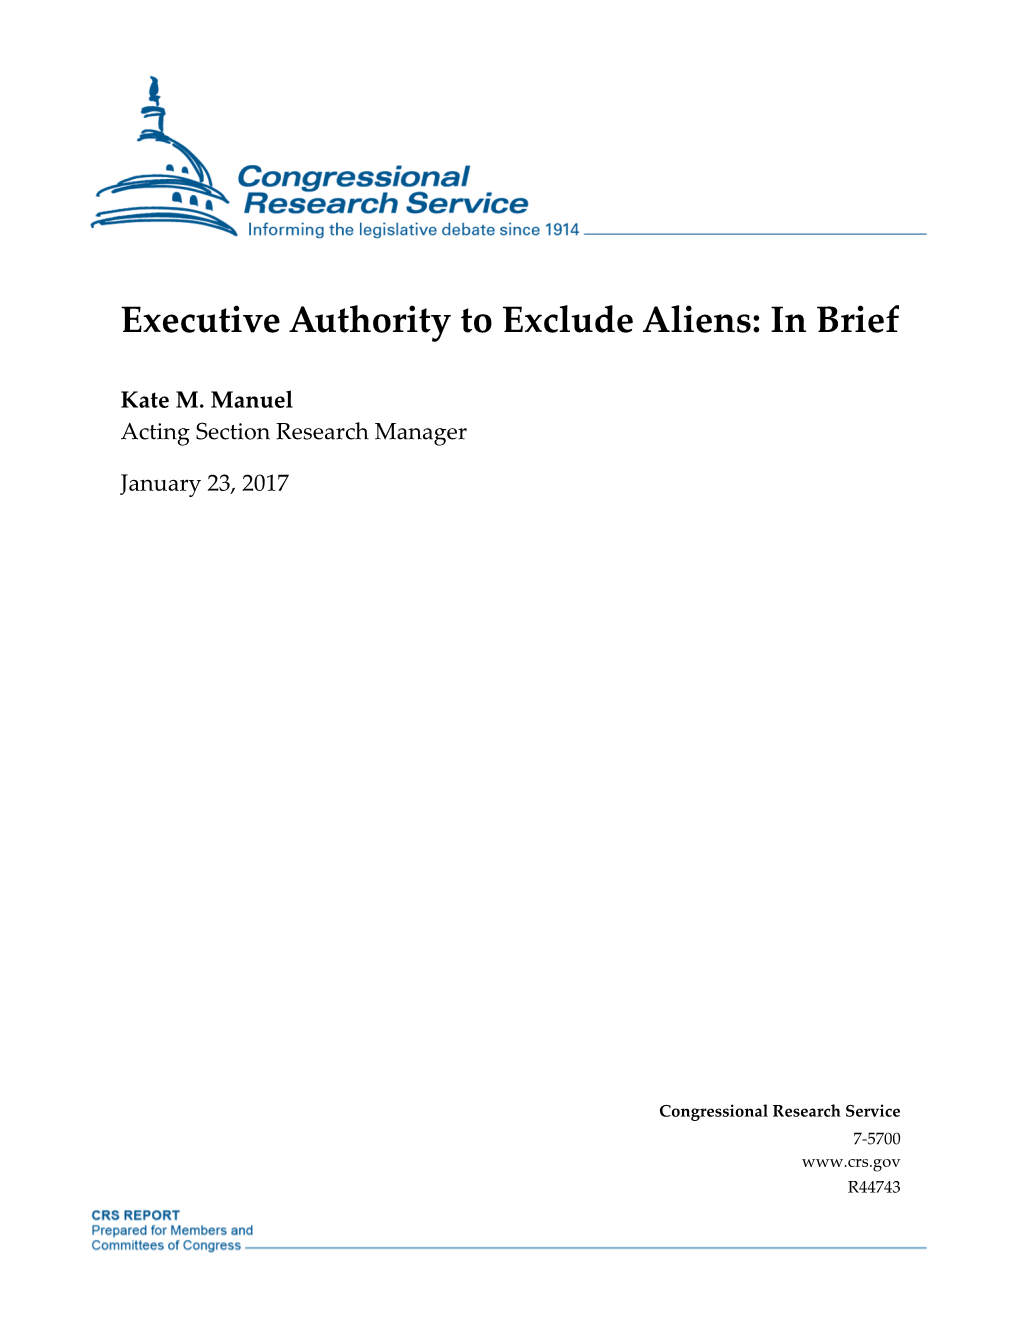 Executive Authority to Exclude Aliens: in Brief